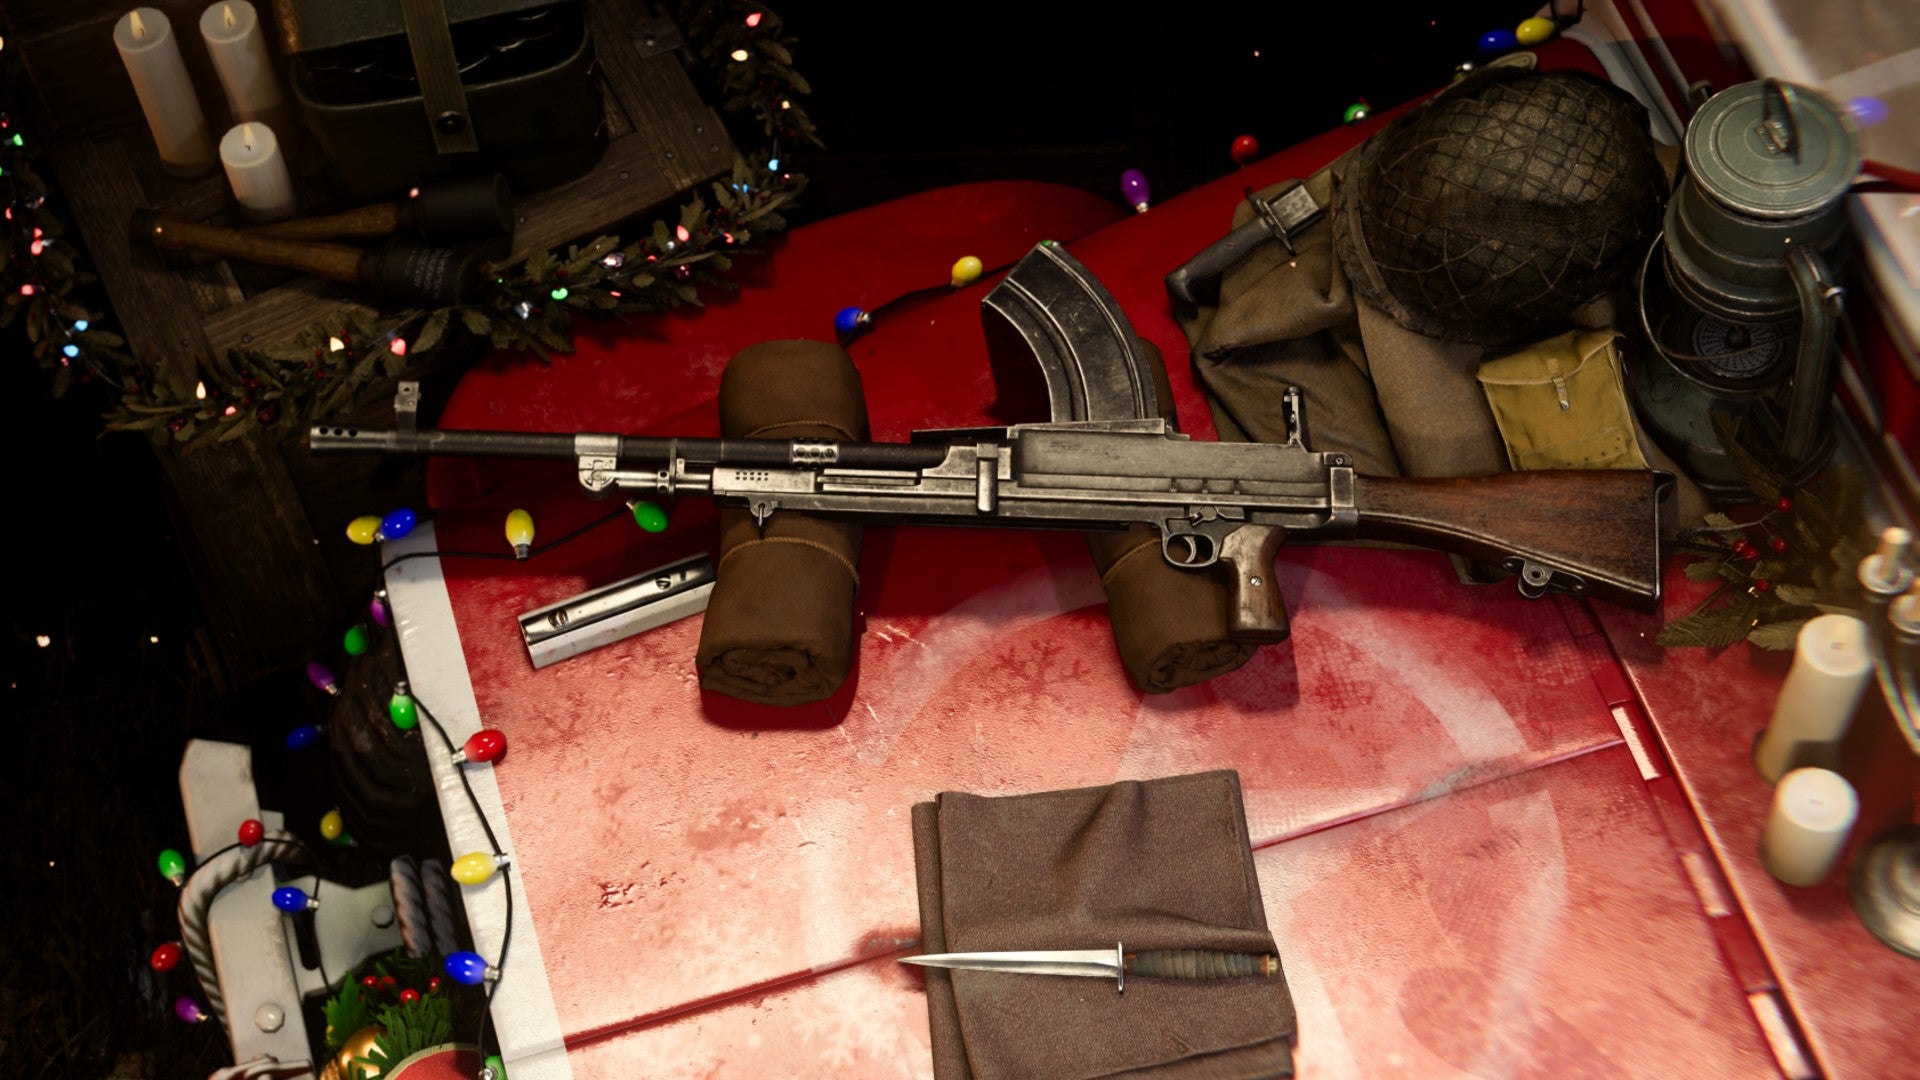 The Bren LMG on a very festive crate in the Vanguard loadout screen. It is surrounded by Christmas lights and candles, with a combat knife nearby.